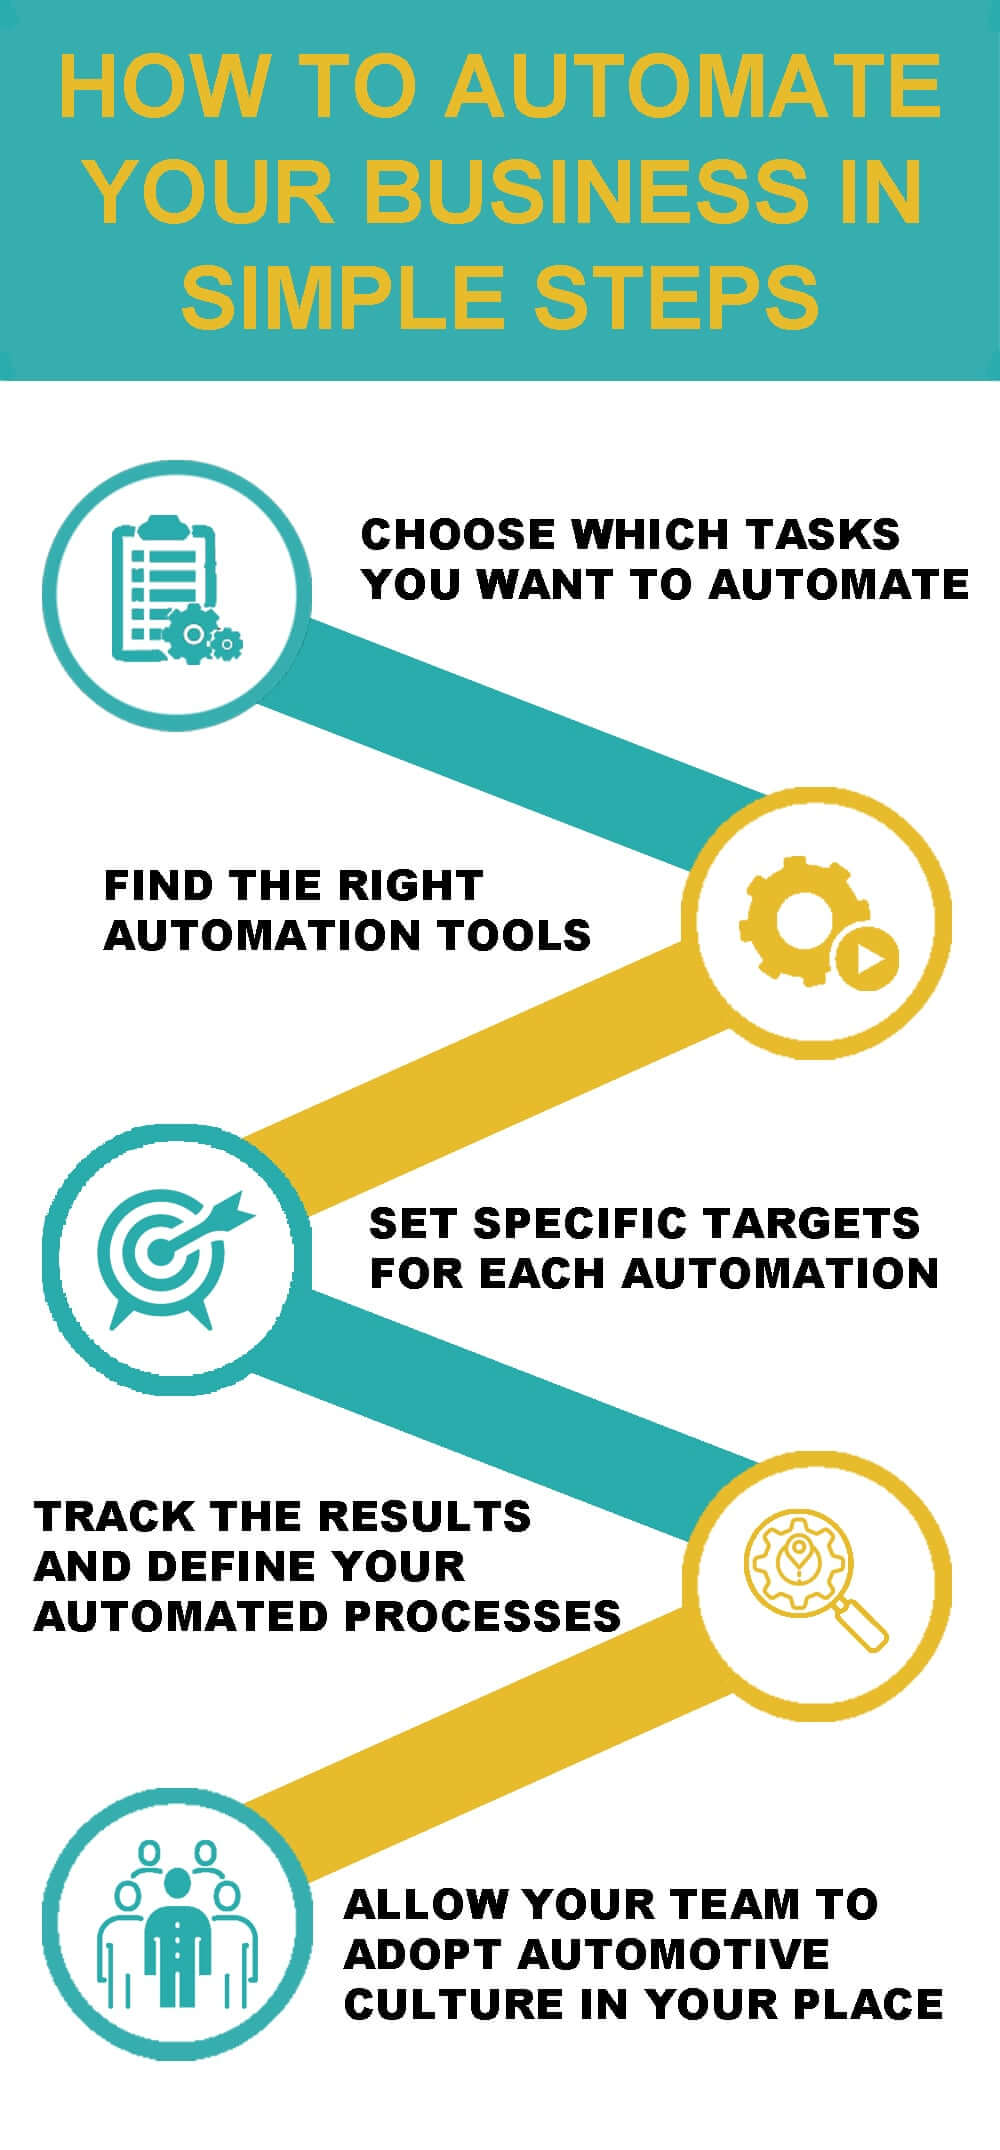 25-Things-You-Can-Automate-in-your-Business-min